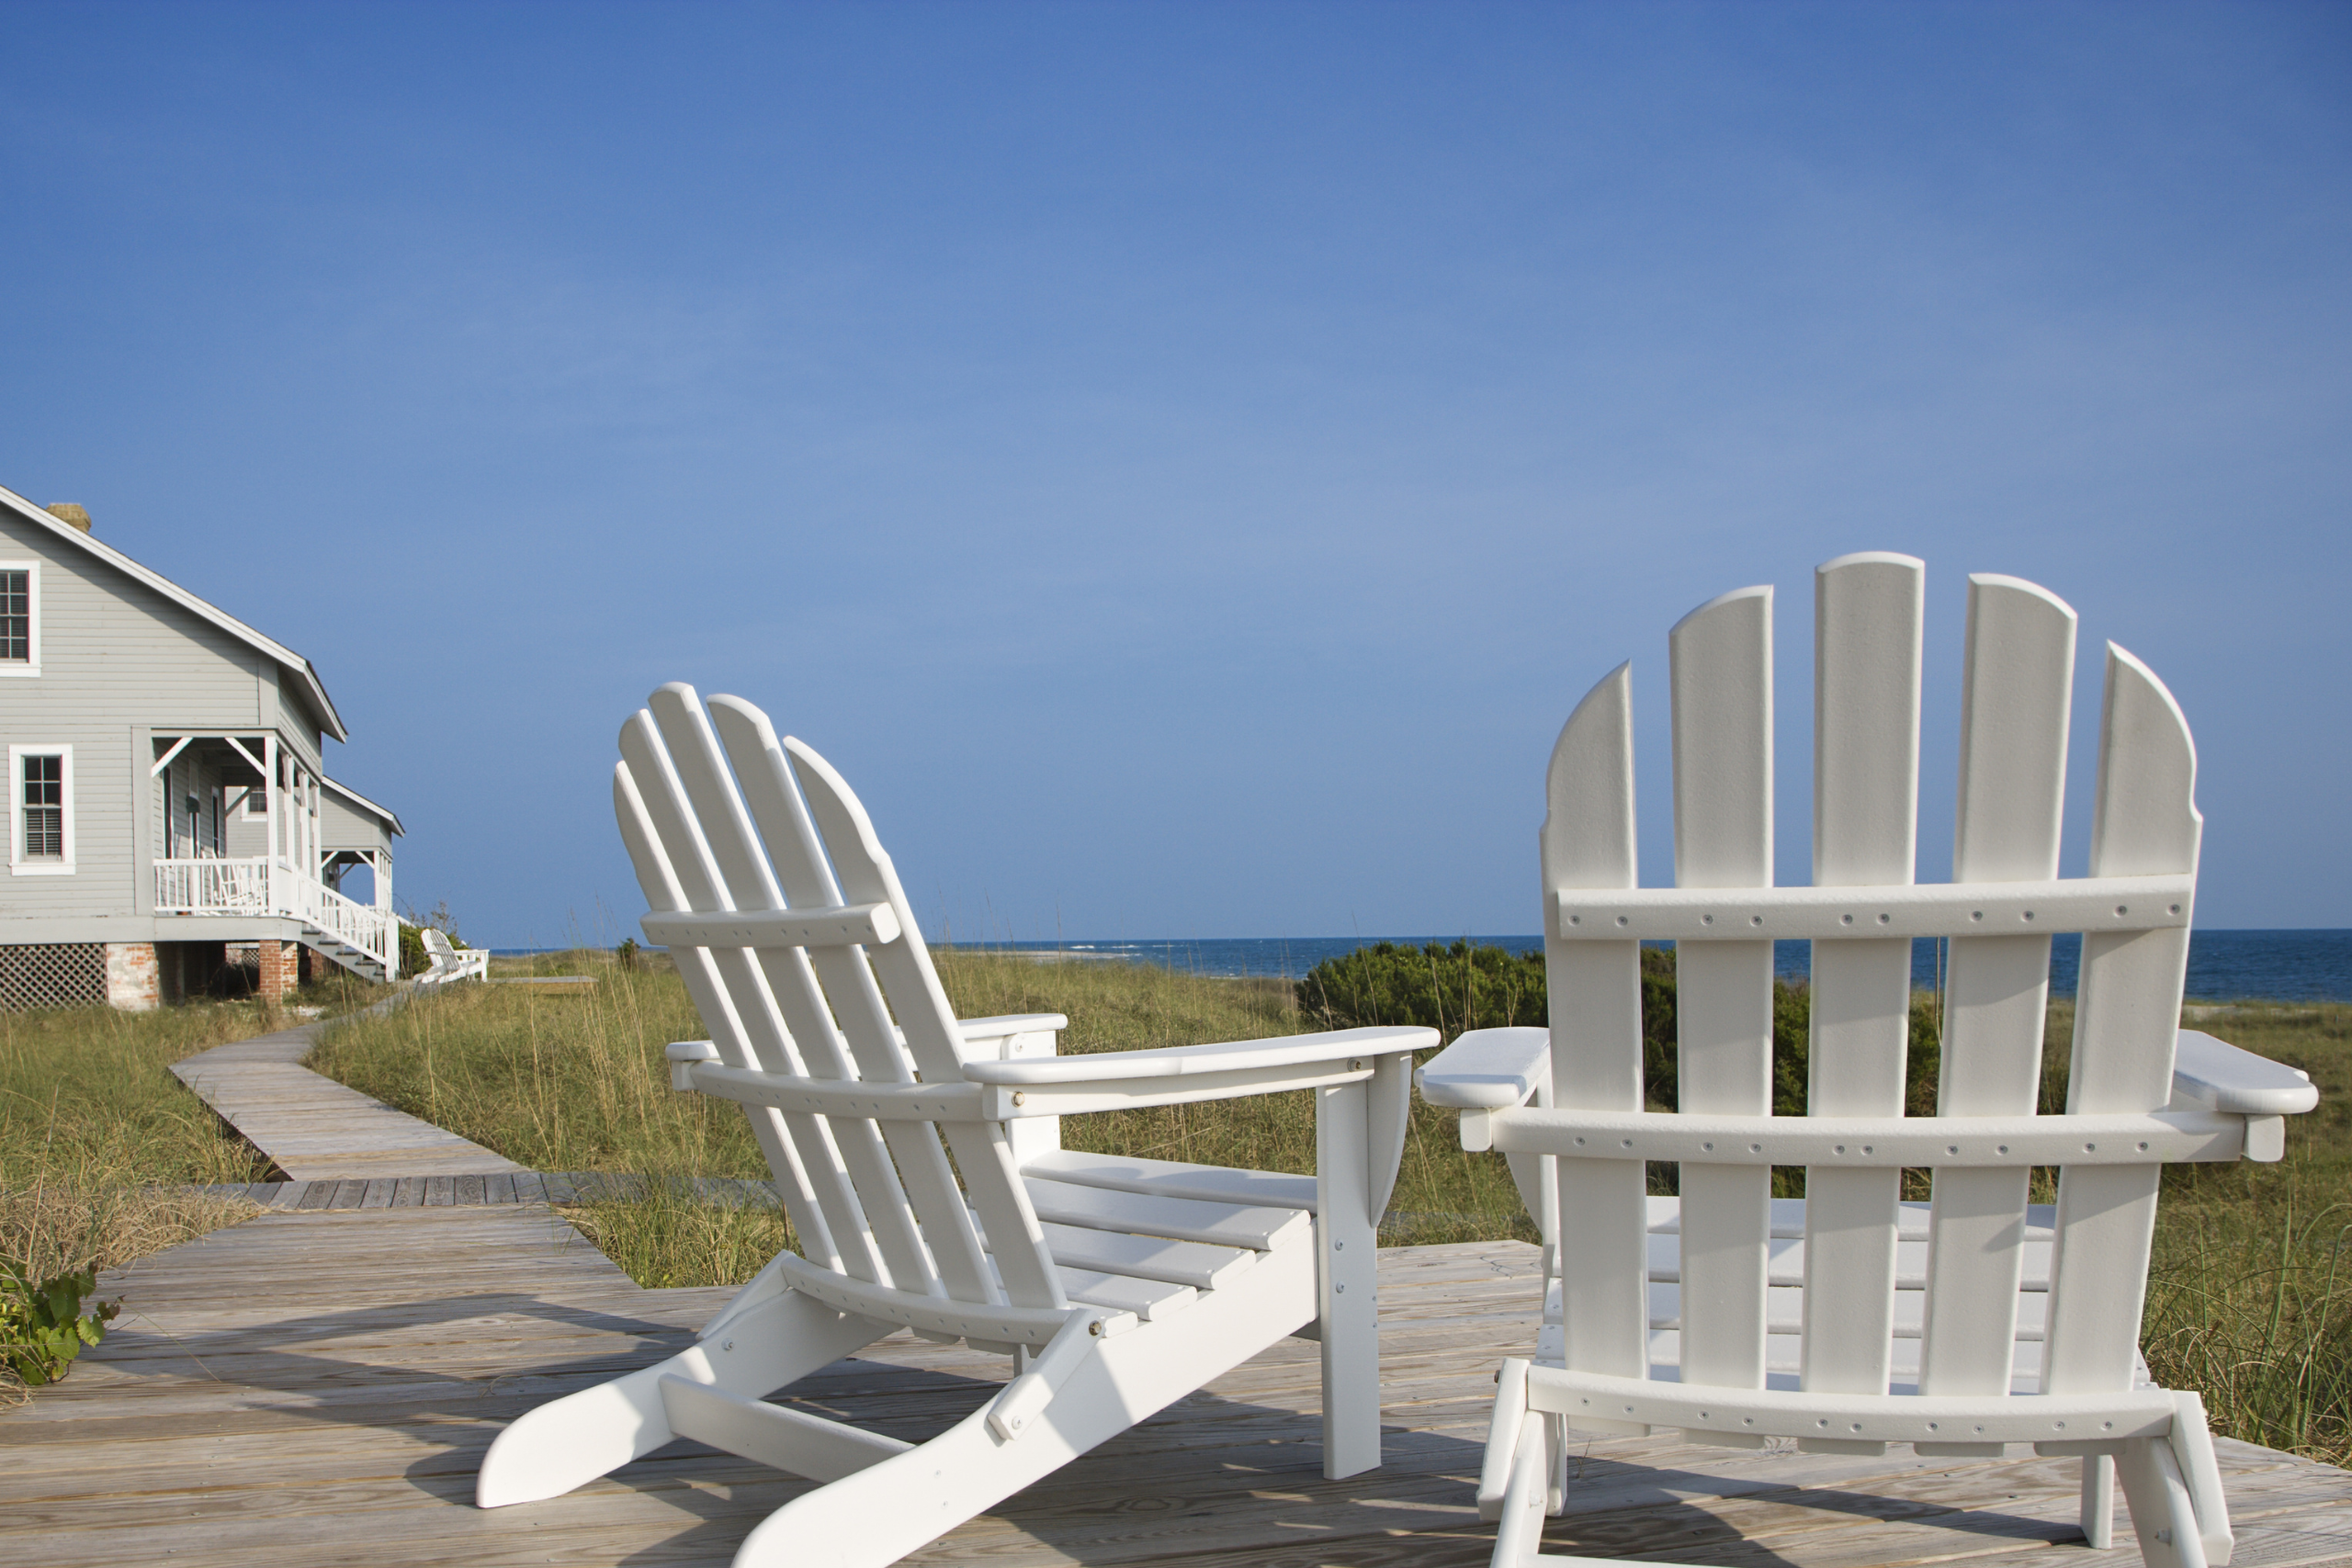 Two white Adirondack chairs on a wooden walkway with a house and ocean in the background.